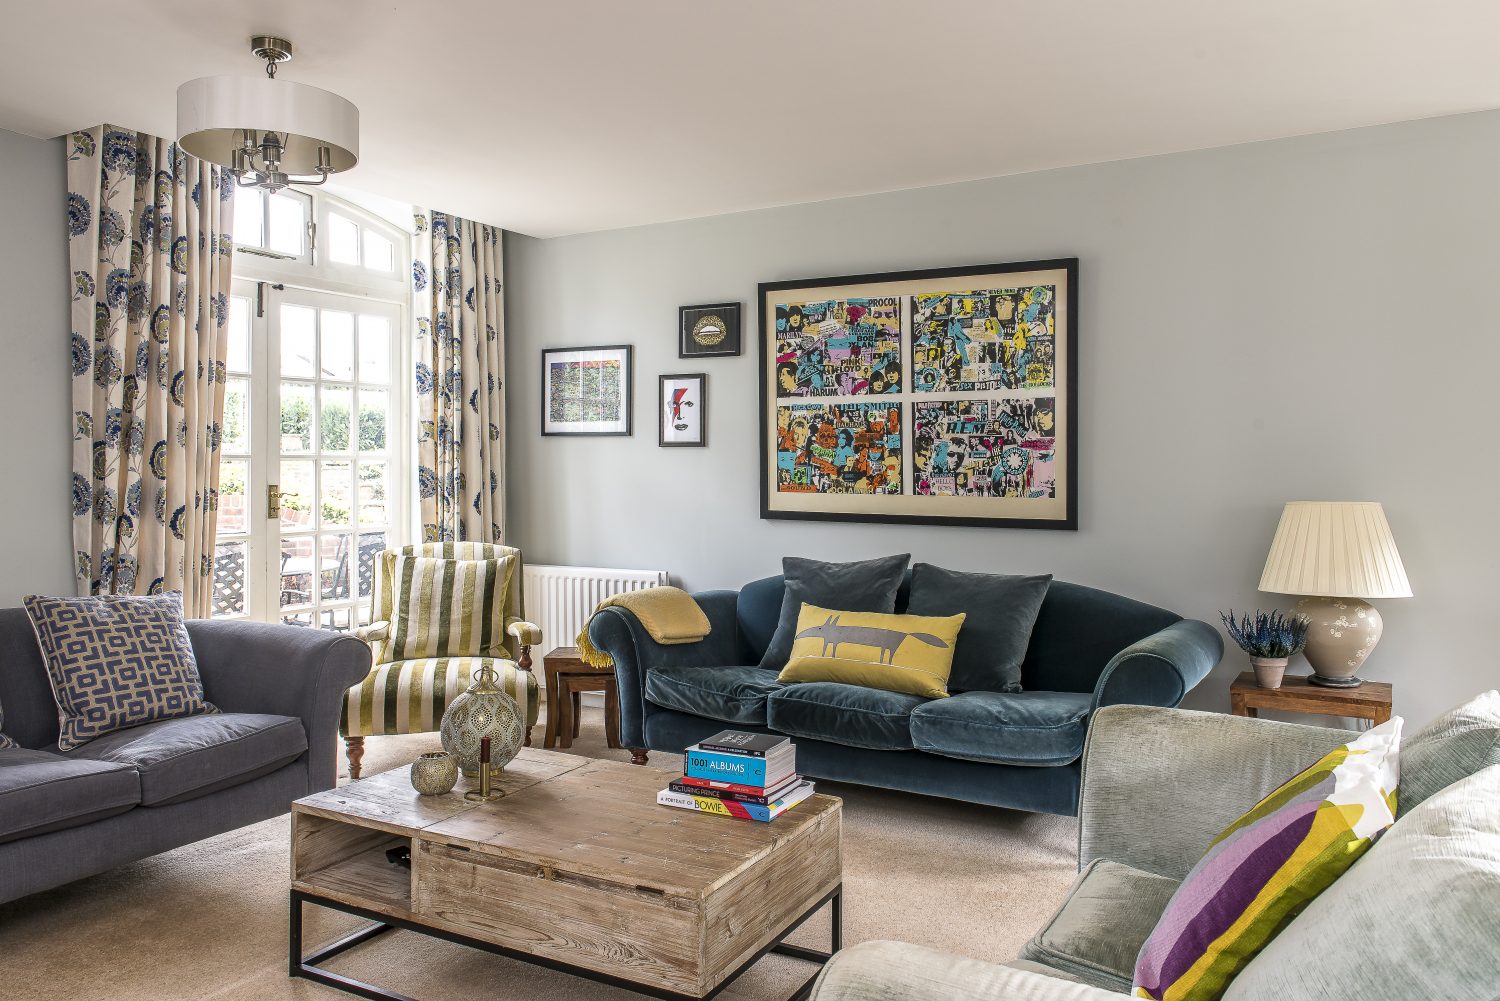 The large artwork is from Wimbledon Studios. The lips and Bowie print are fron Gina Potter on Instagram @ginagpotter The sofas are from sofas.com